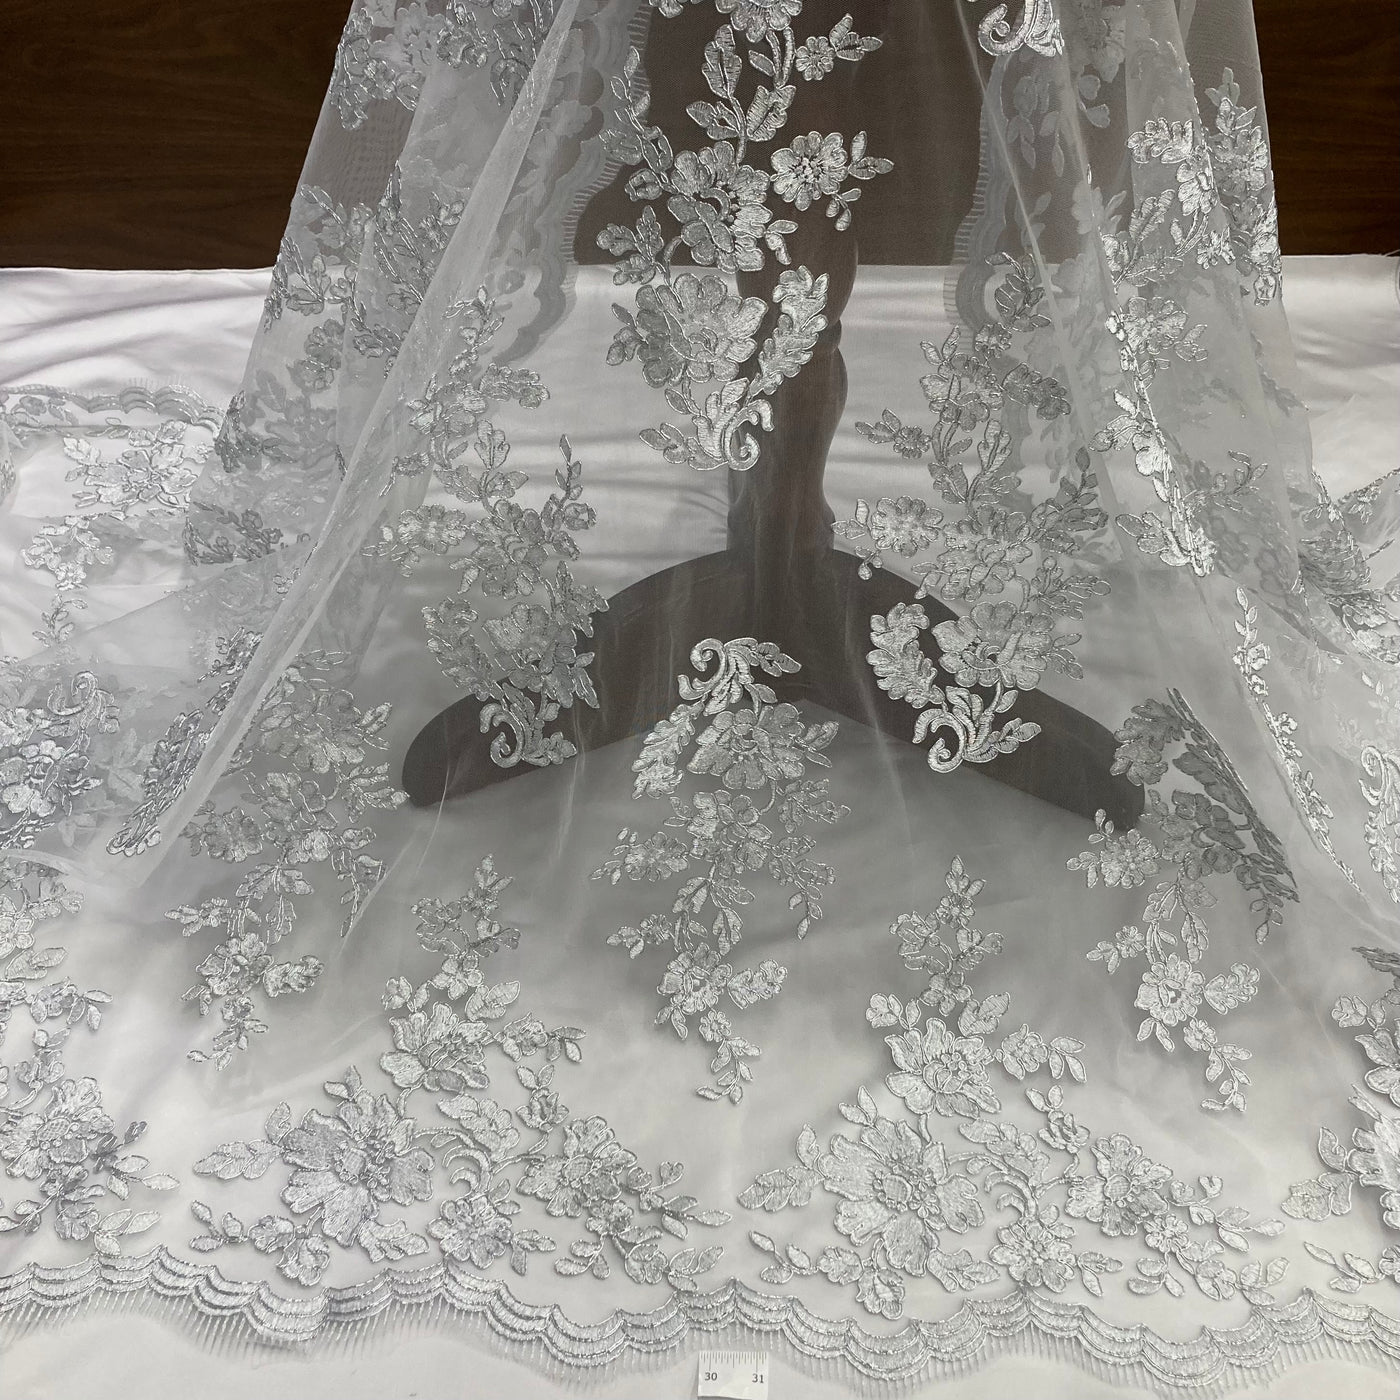 Corded Bridal Lace Fabric Embroidered on Poly Net Mesh. Lace USA